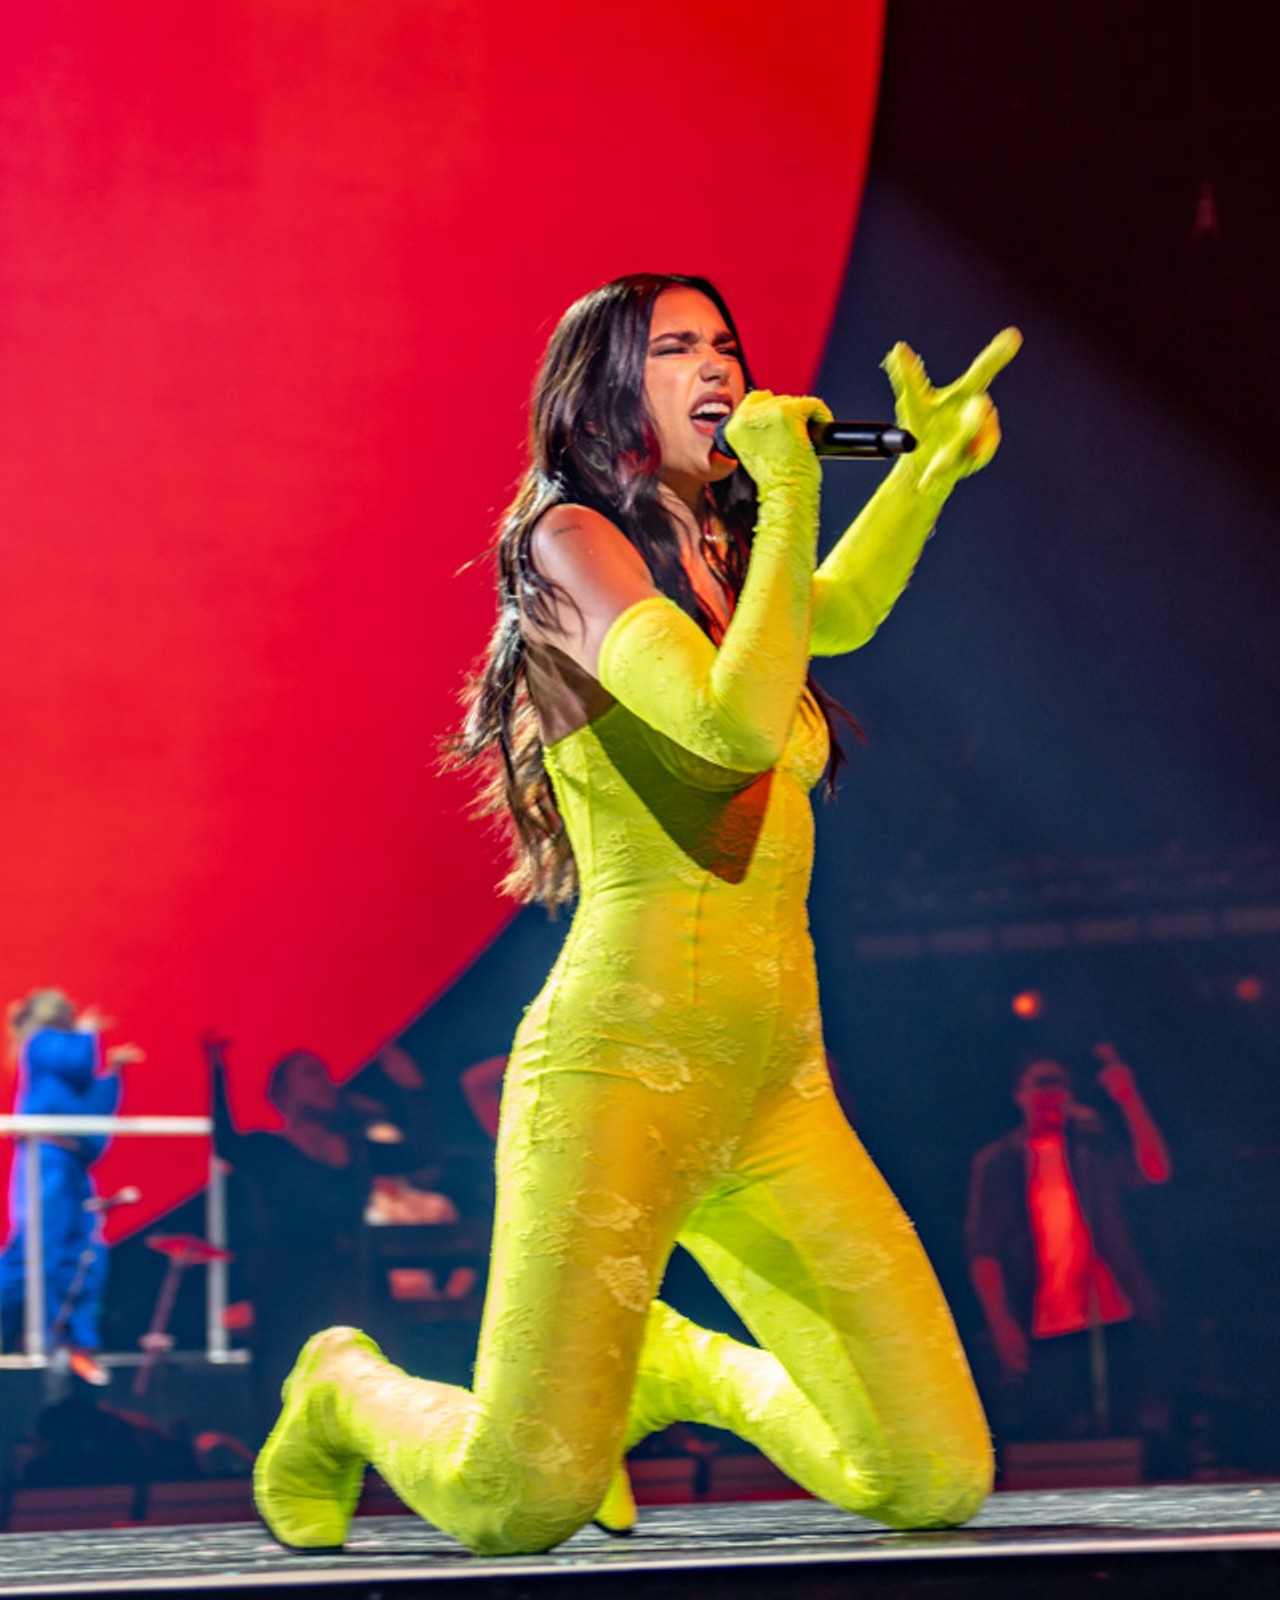 Everything We Saw at the Dua Lipa Show at Schottenstein Center in Columbus